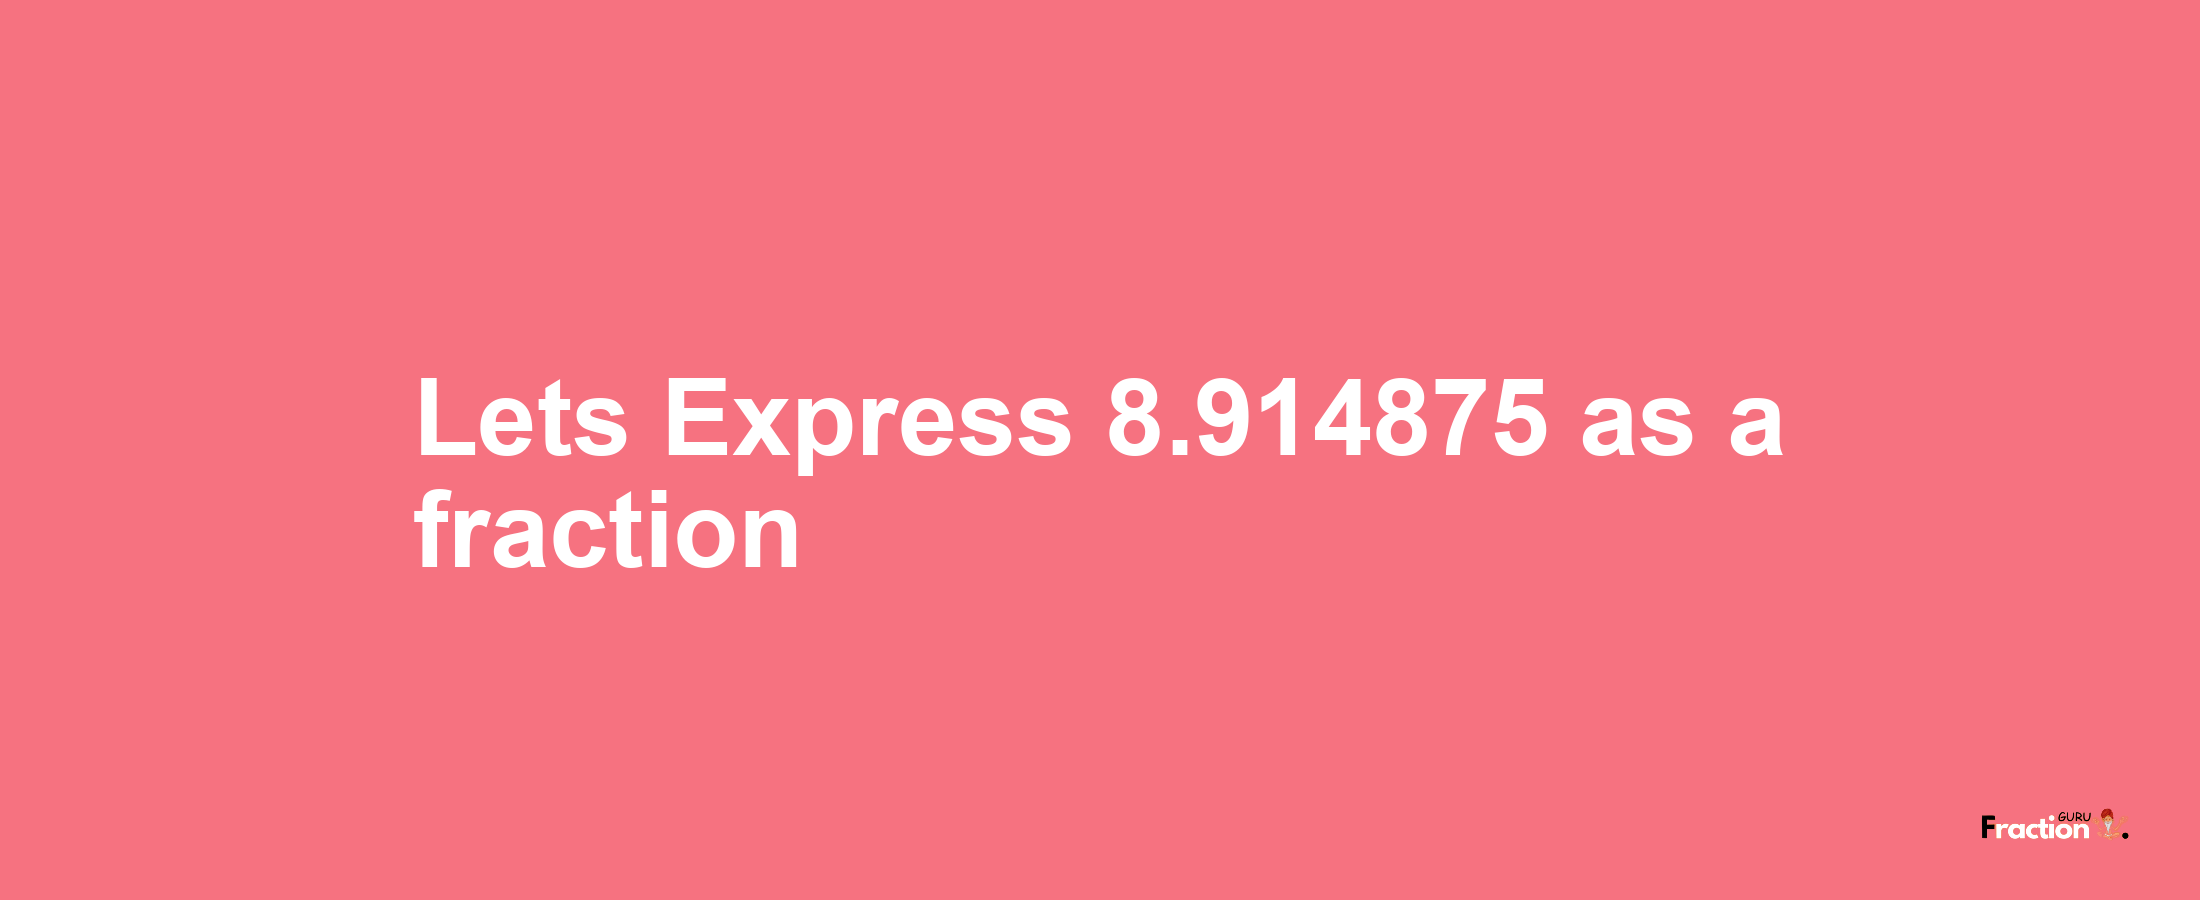 Lets Express 8.914875 as afraction